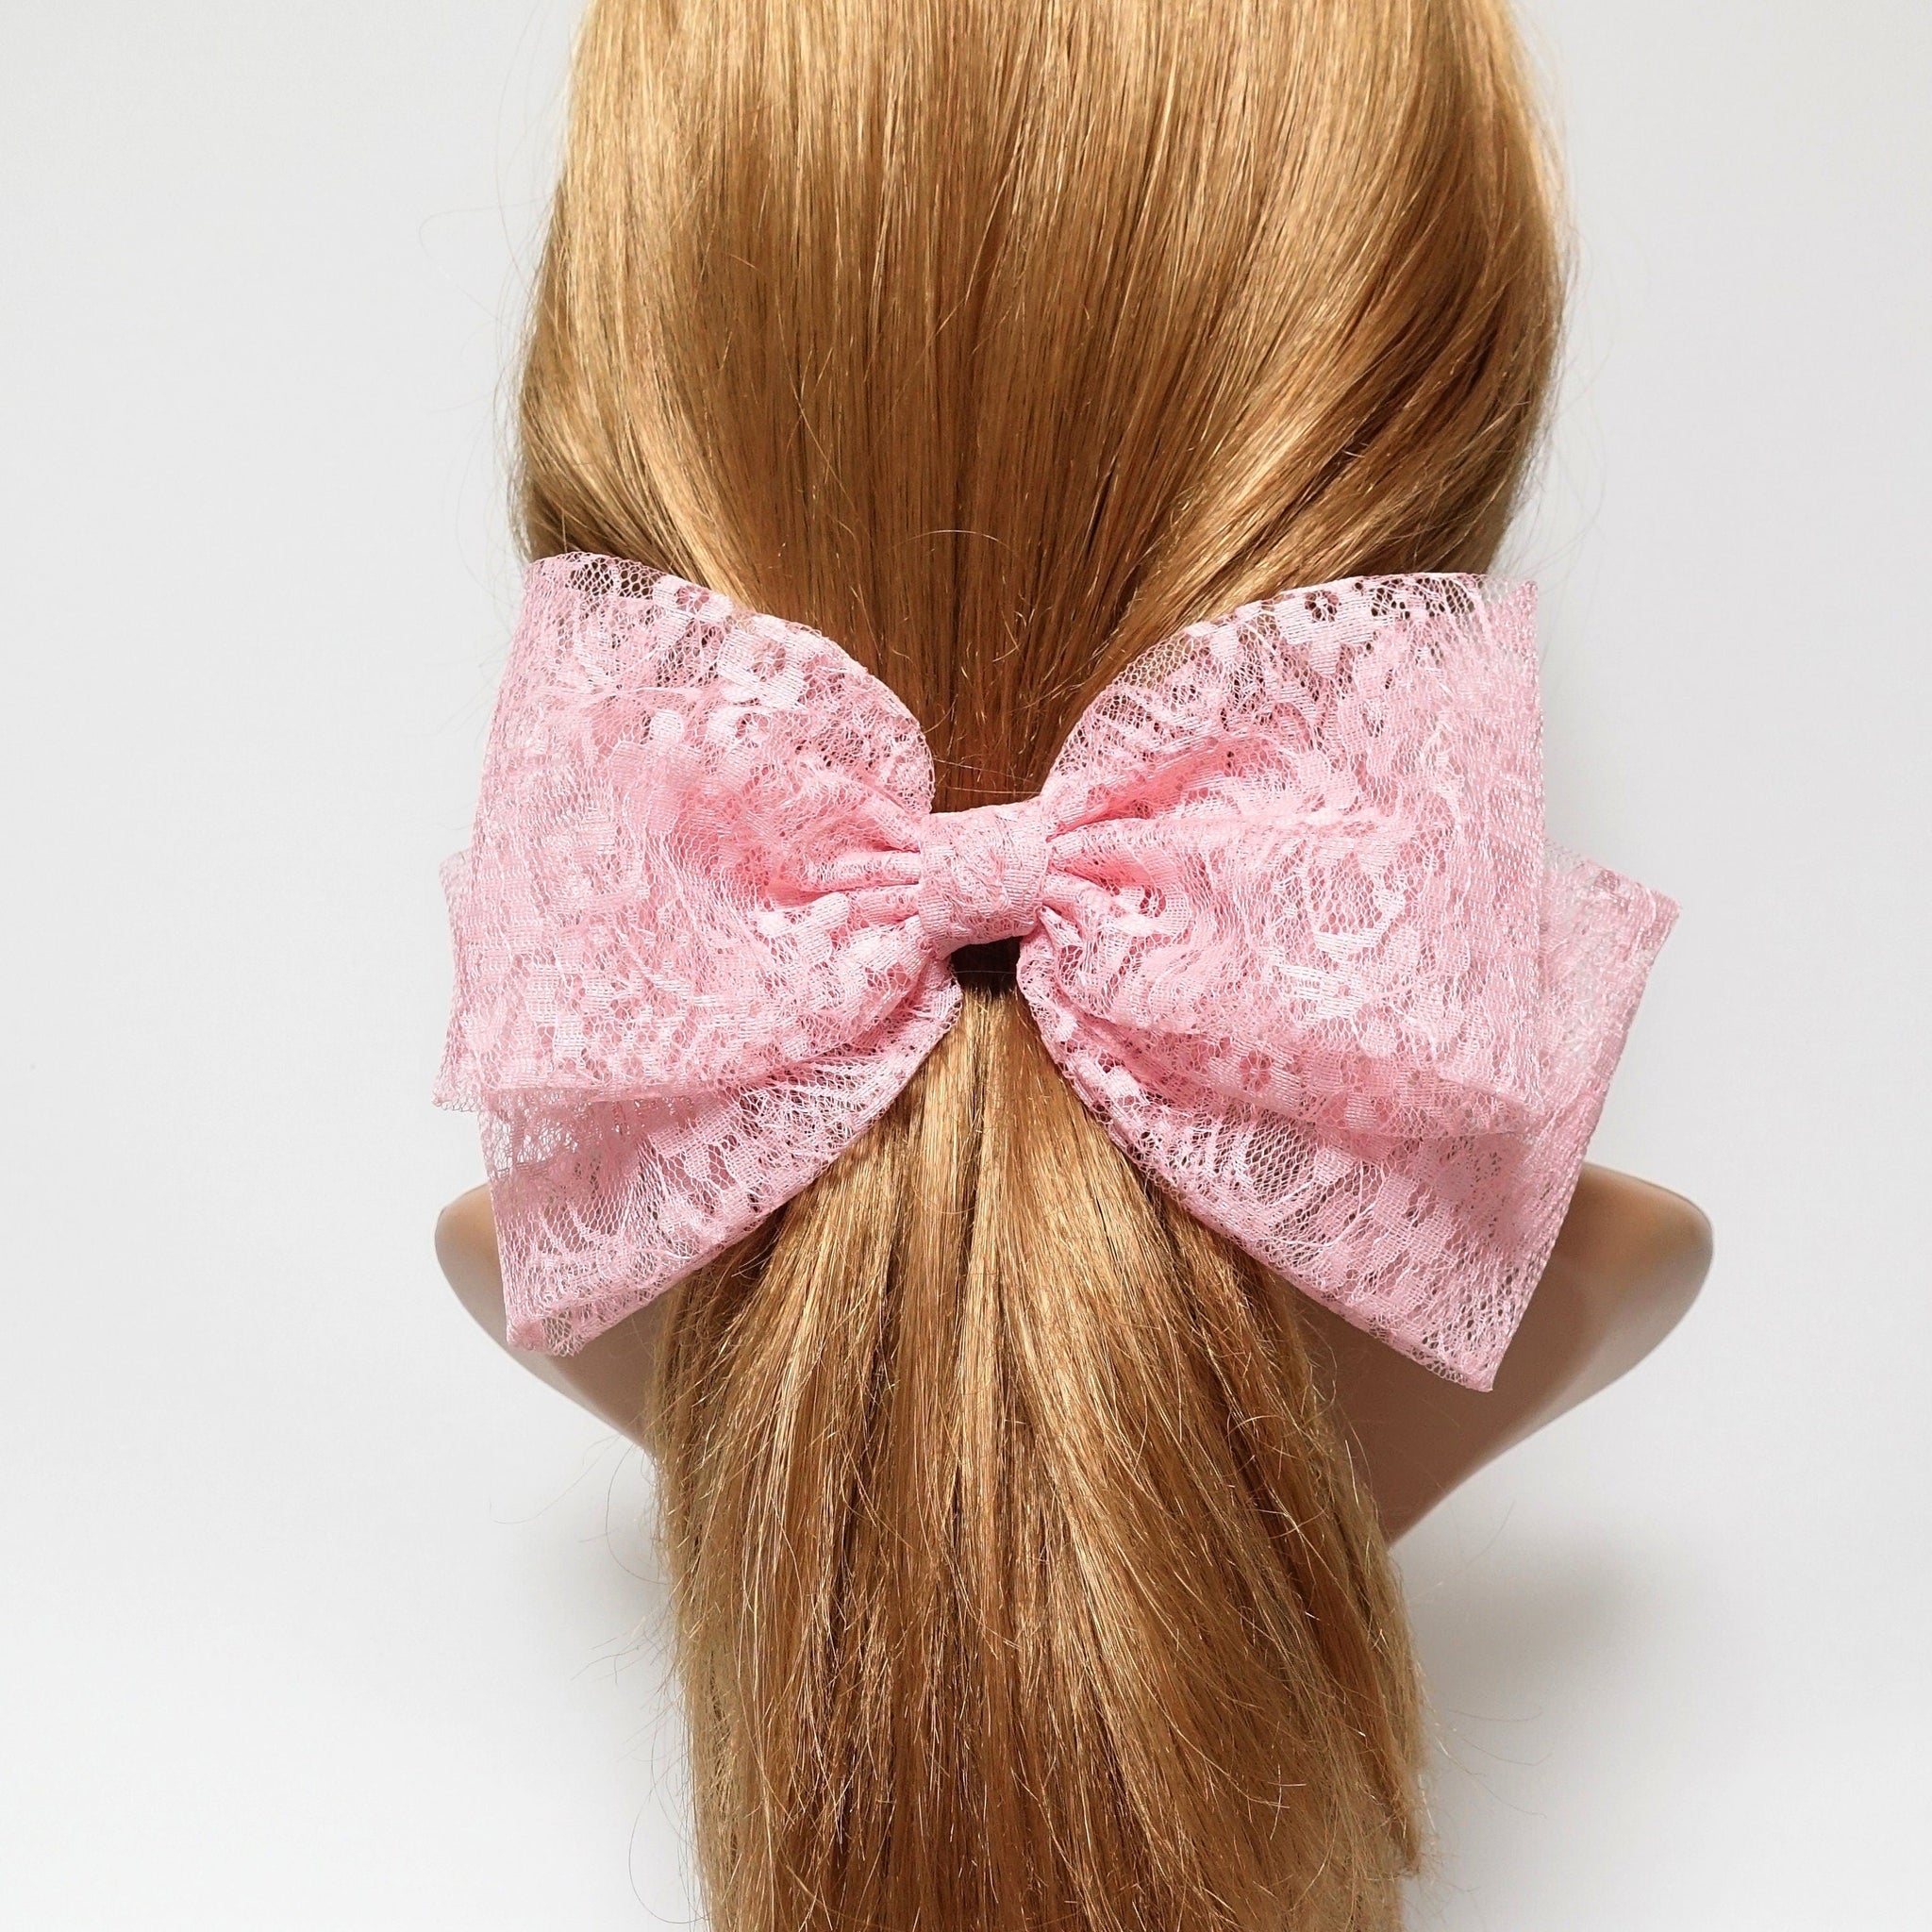 veryshine.com Barrette (Bow) Pink big floral lace layered bow Texas hair bow french barrette